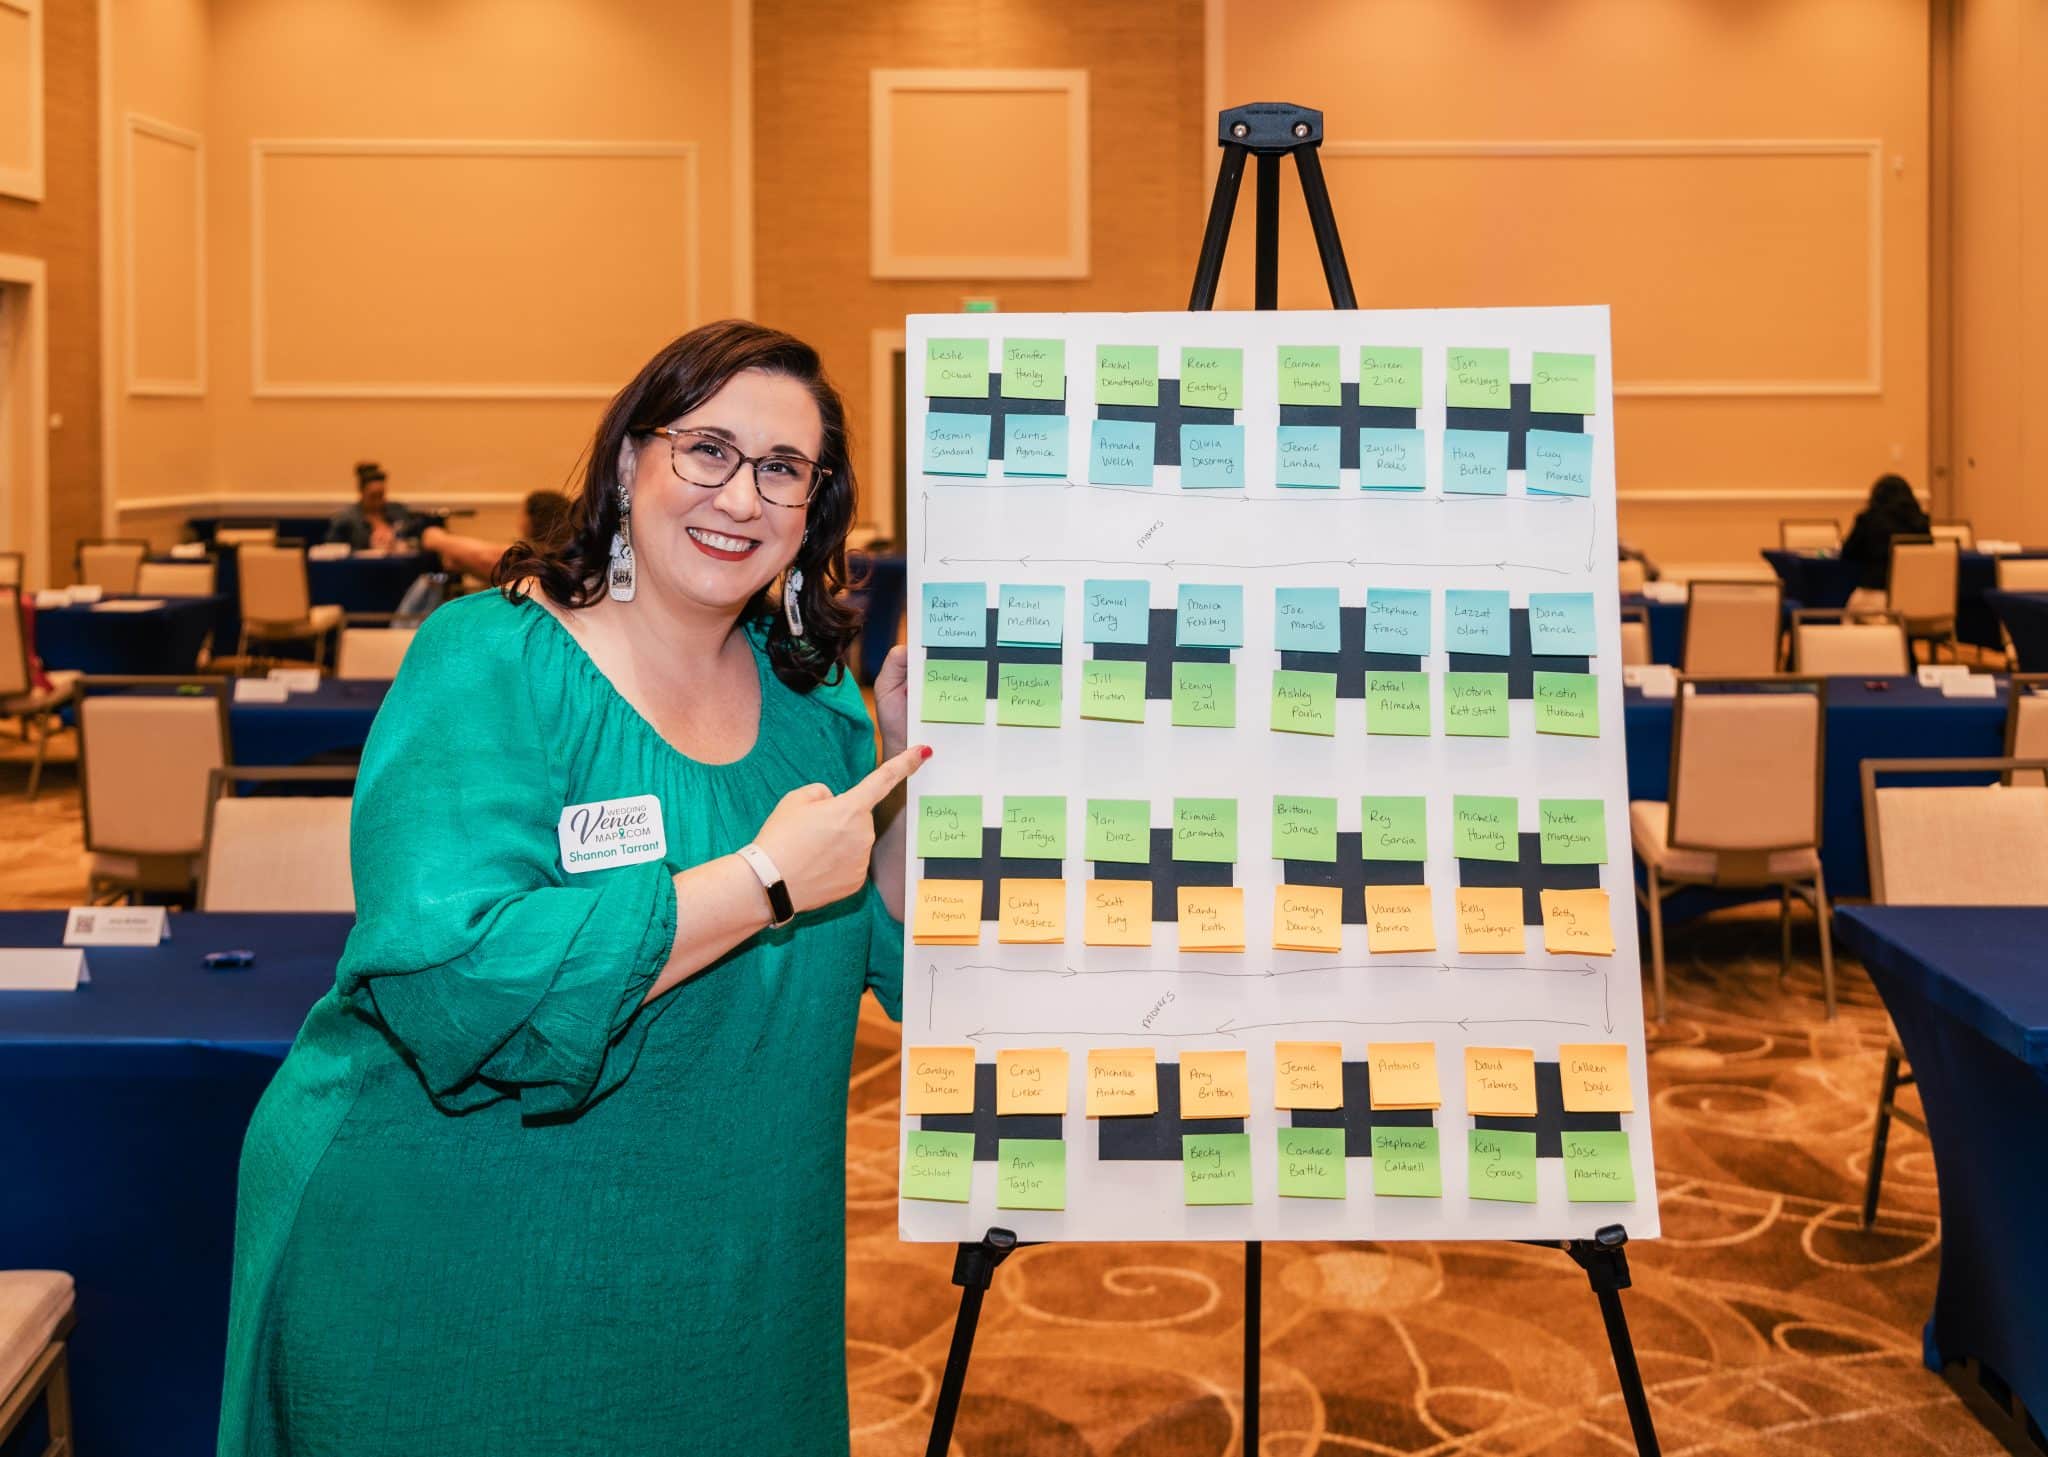 woman wearing green dress stands next to seating chart pointing to it and smiling